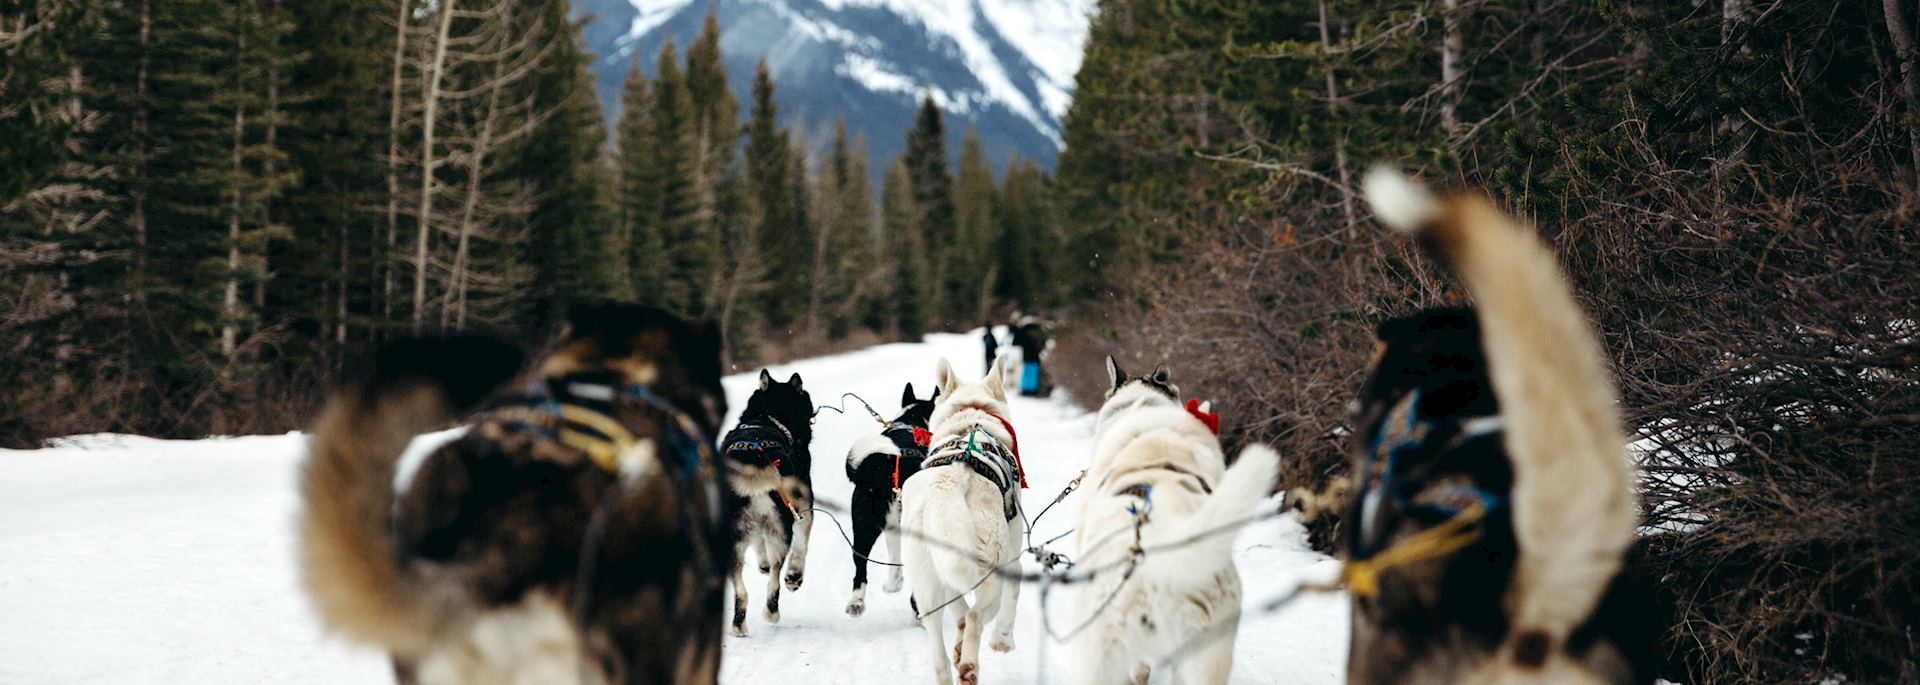 Dog sledding in the Callaghan Valley